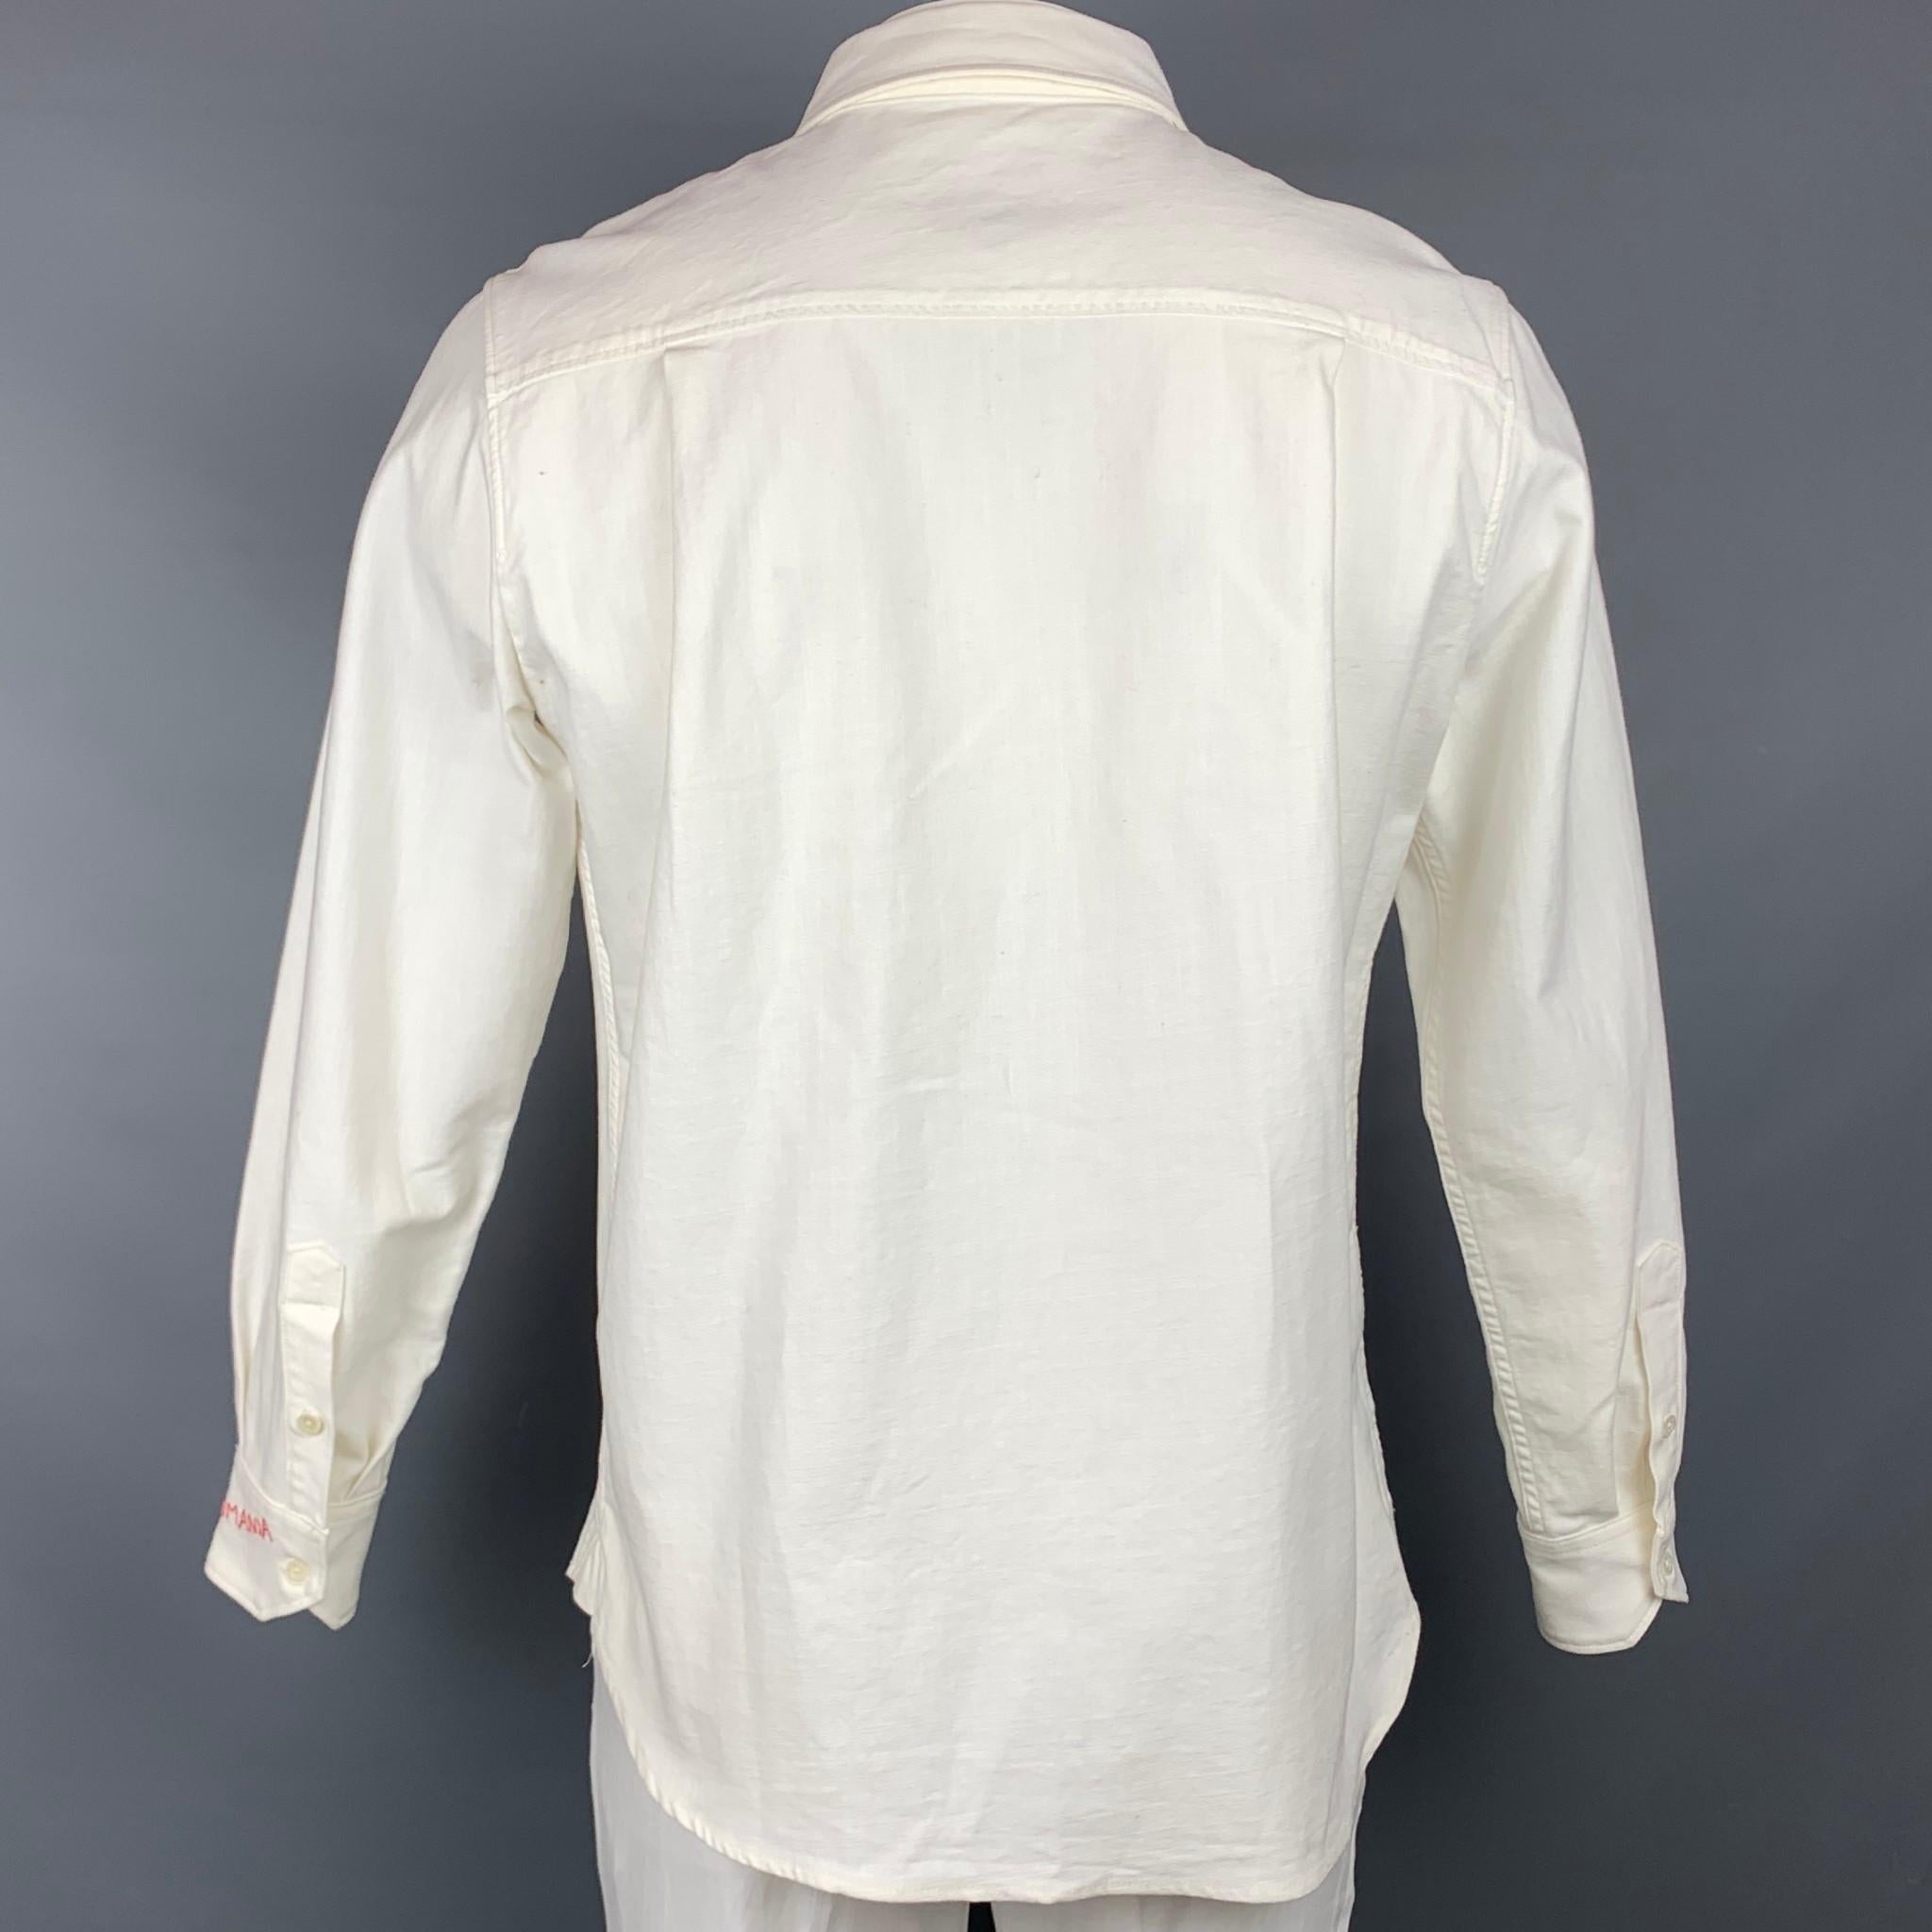 VIVIENNE WESTWOOD ANGLOMANIA long sleeve shirt comes in a off white cotton with a 